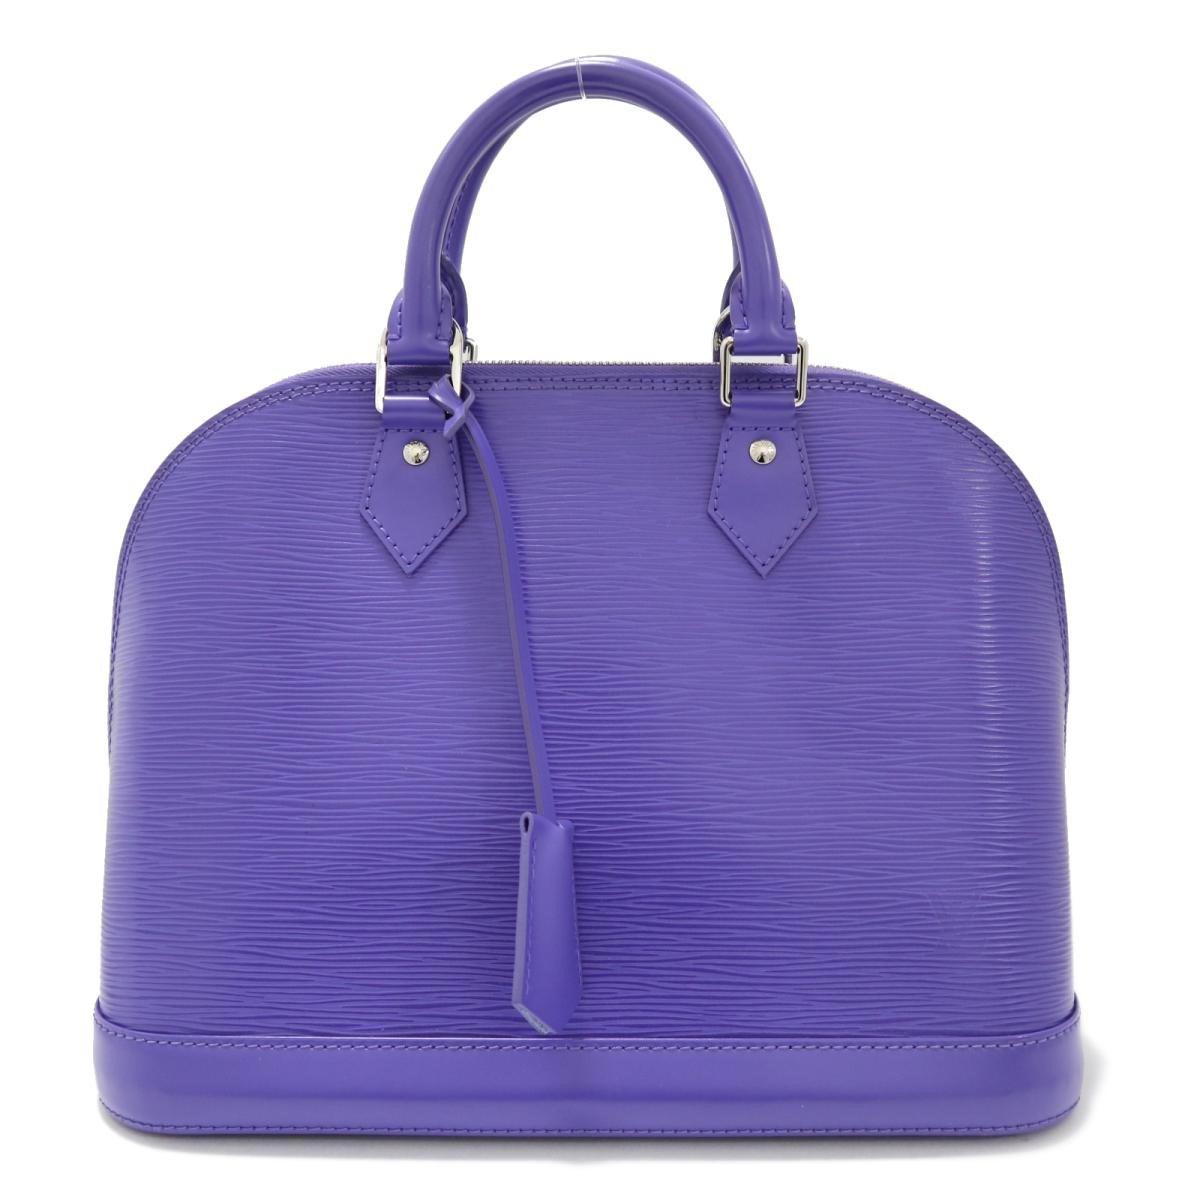 Lyst - Louis Vuitton Auth Alma Pm Hand Bag Epi Leather Figue / Violet Used Vintage in Purple